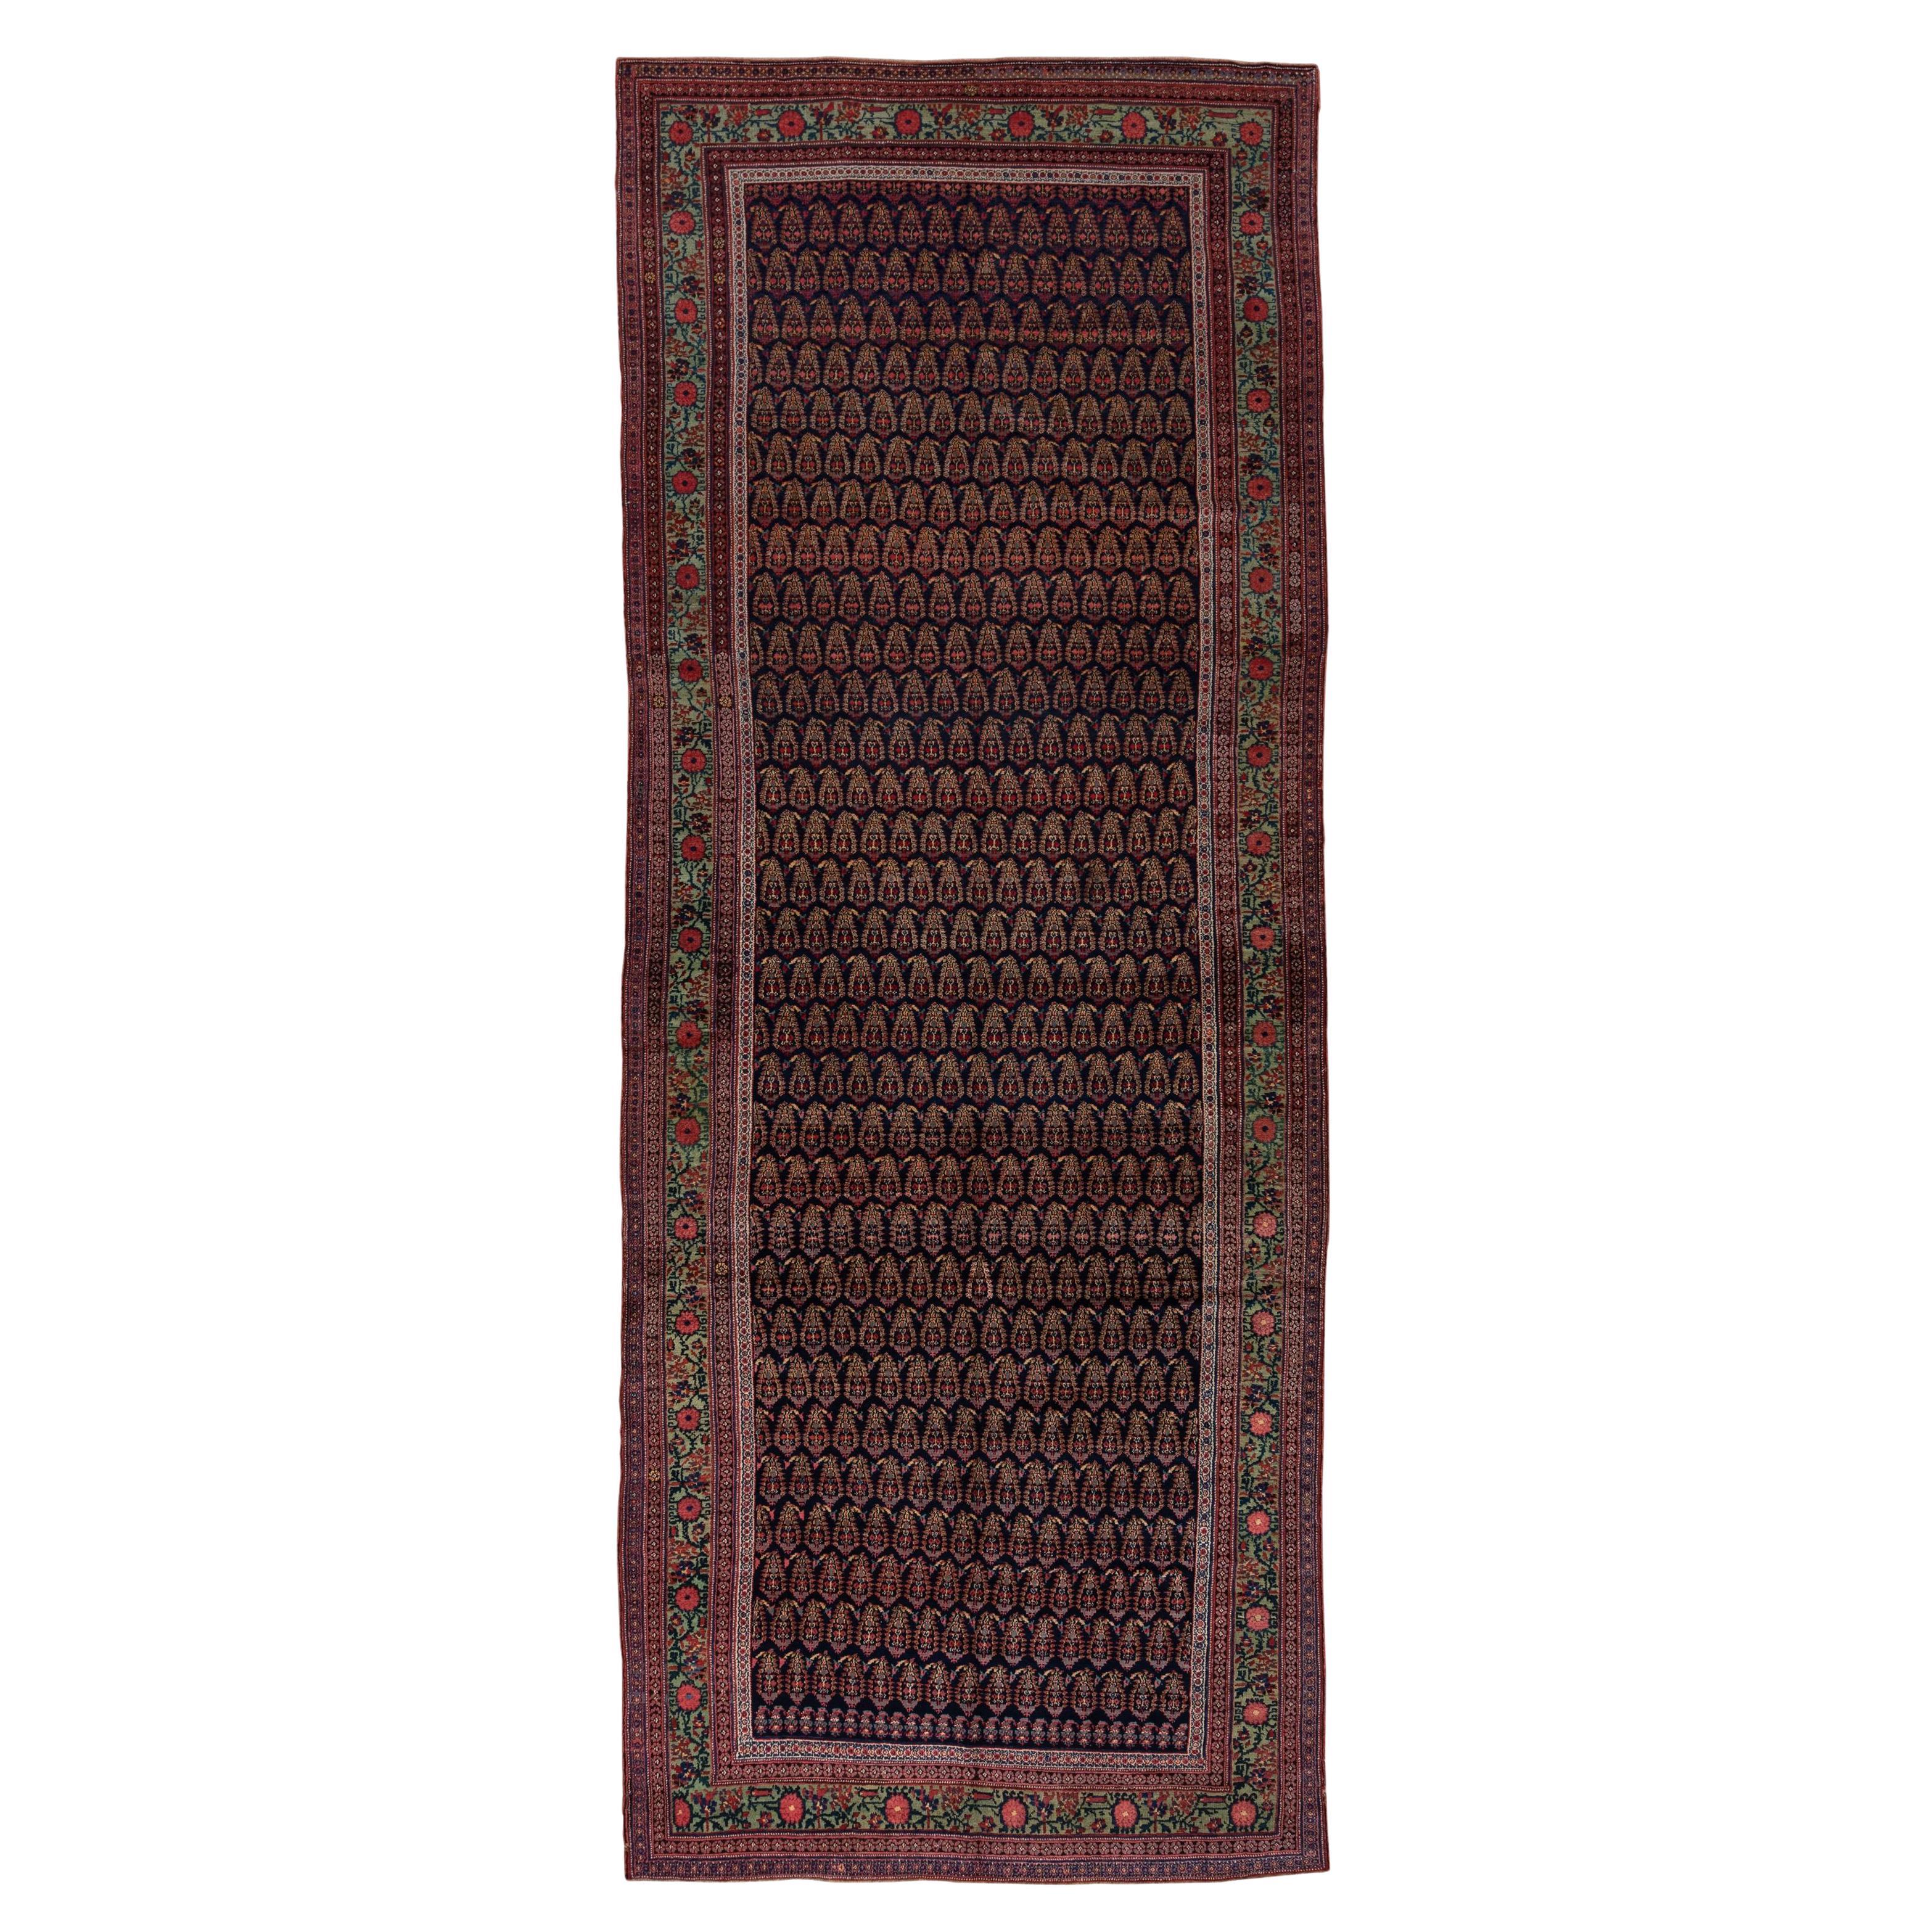 Antique Tribal Persian Malayer Gallery Carpet